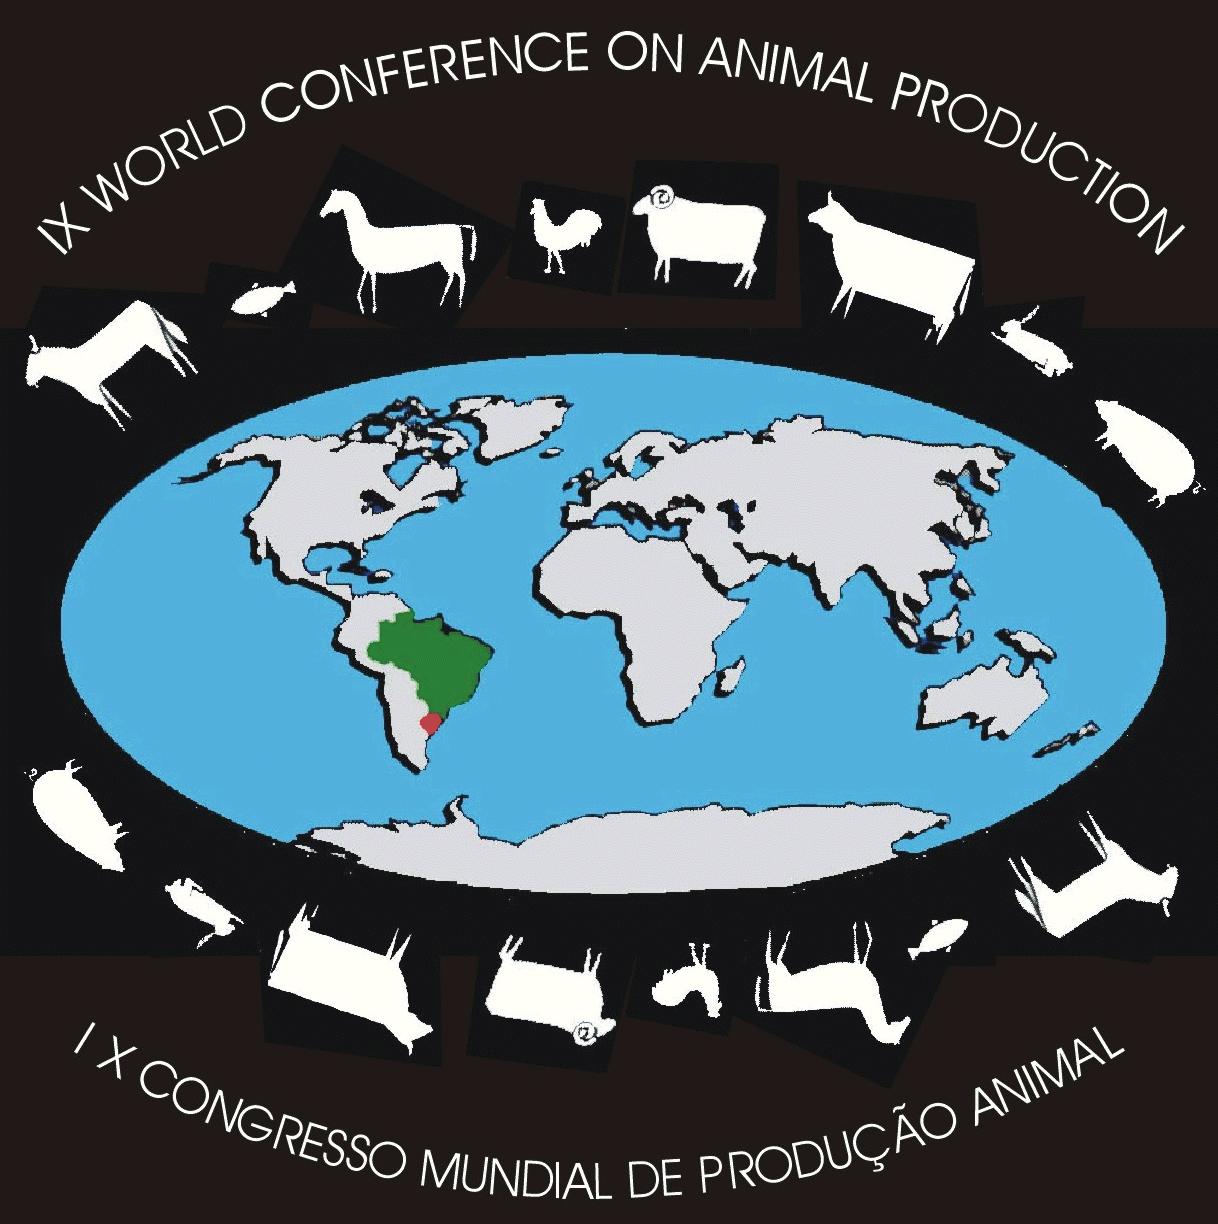 WCAP 2012, World Conference on Animal Production